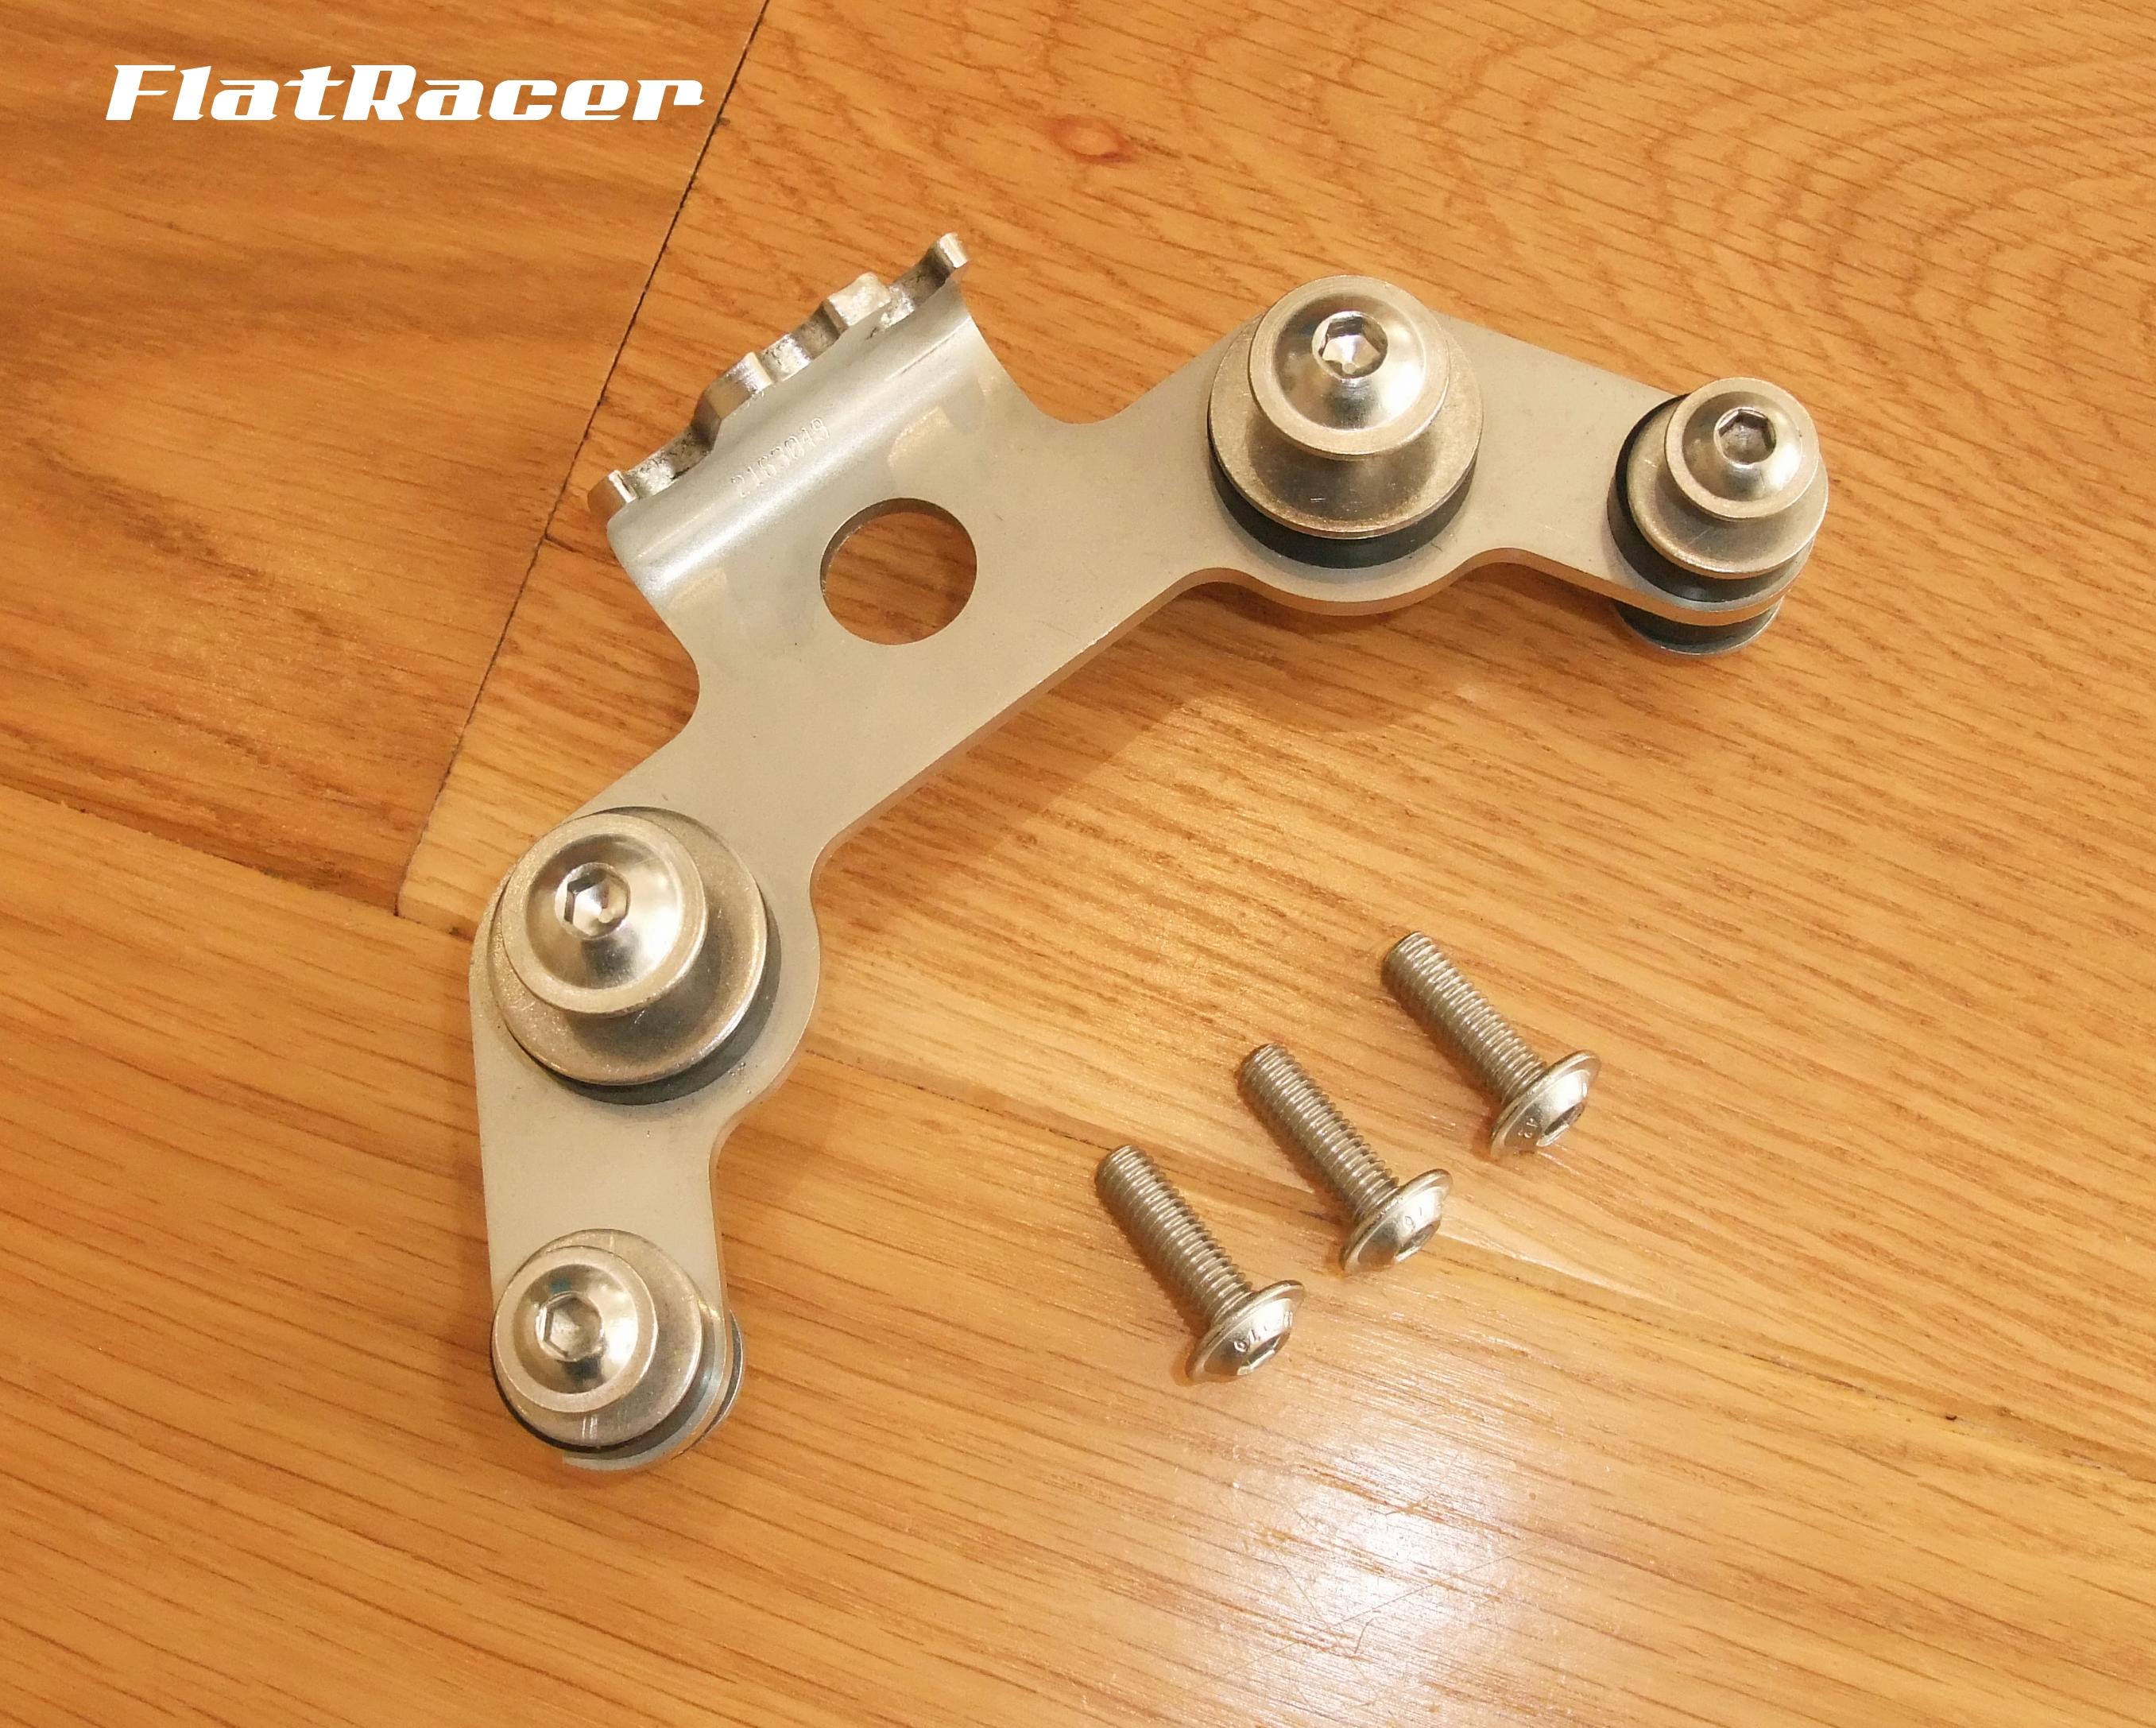 FlatRacer BMW Airhead Boxer stainless steel low instrument cluster bracket - with fittings